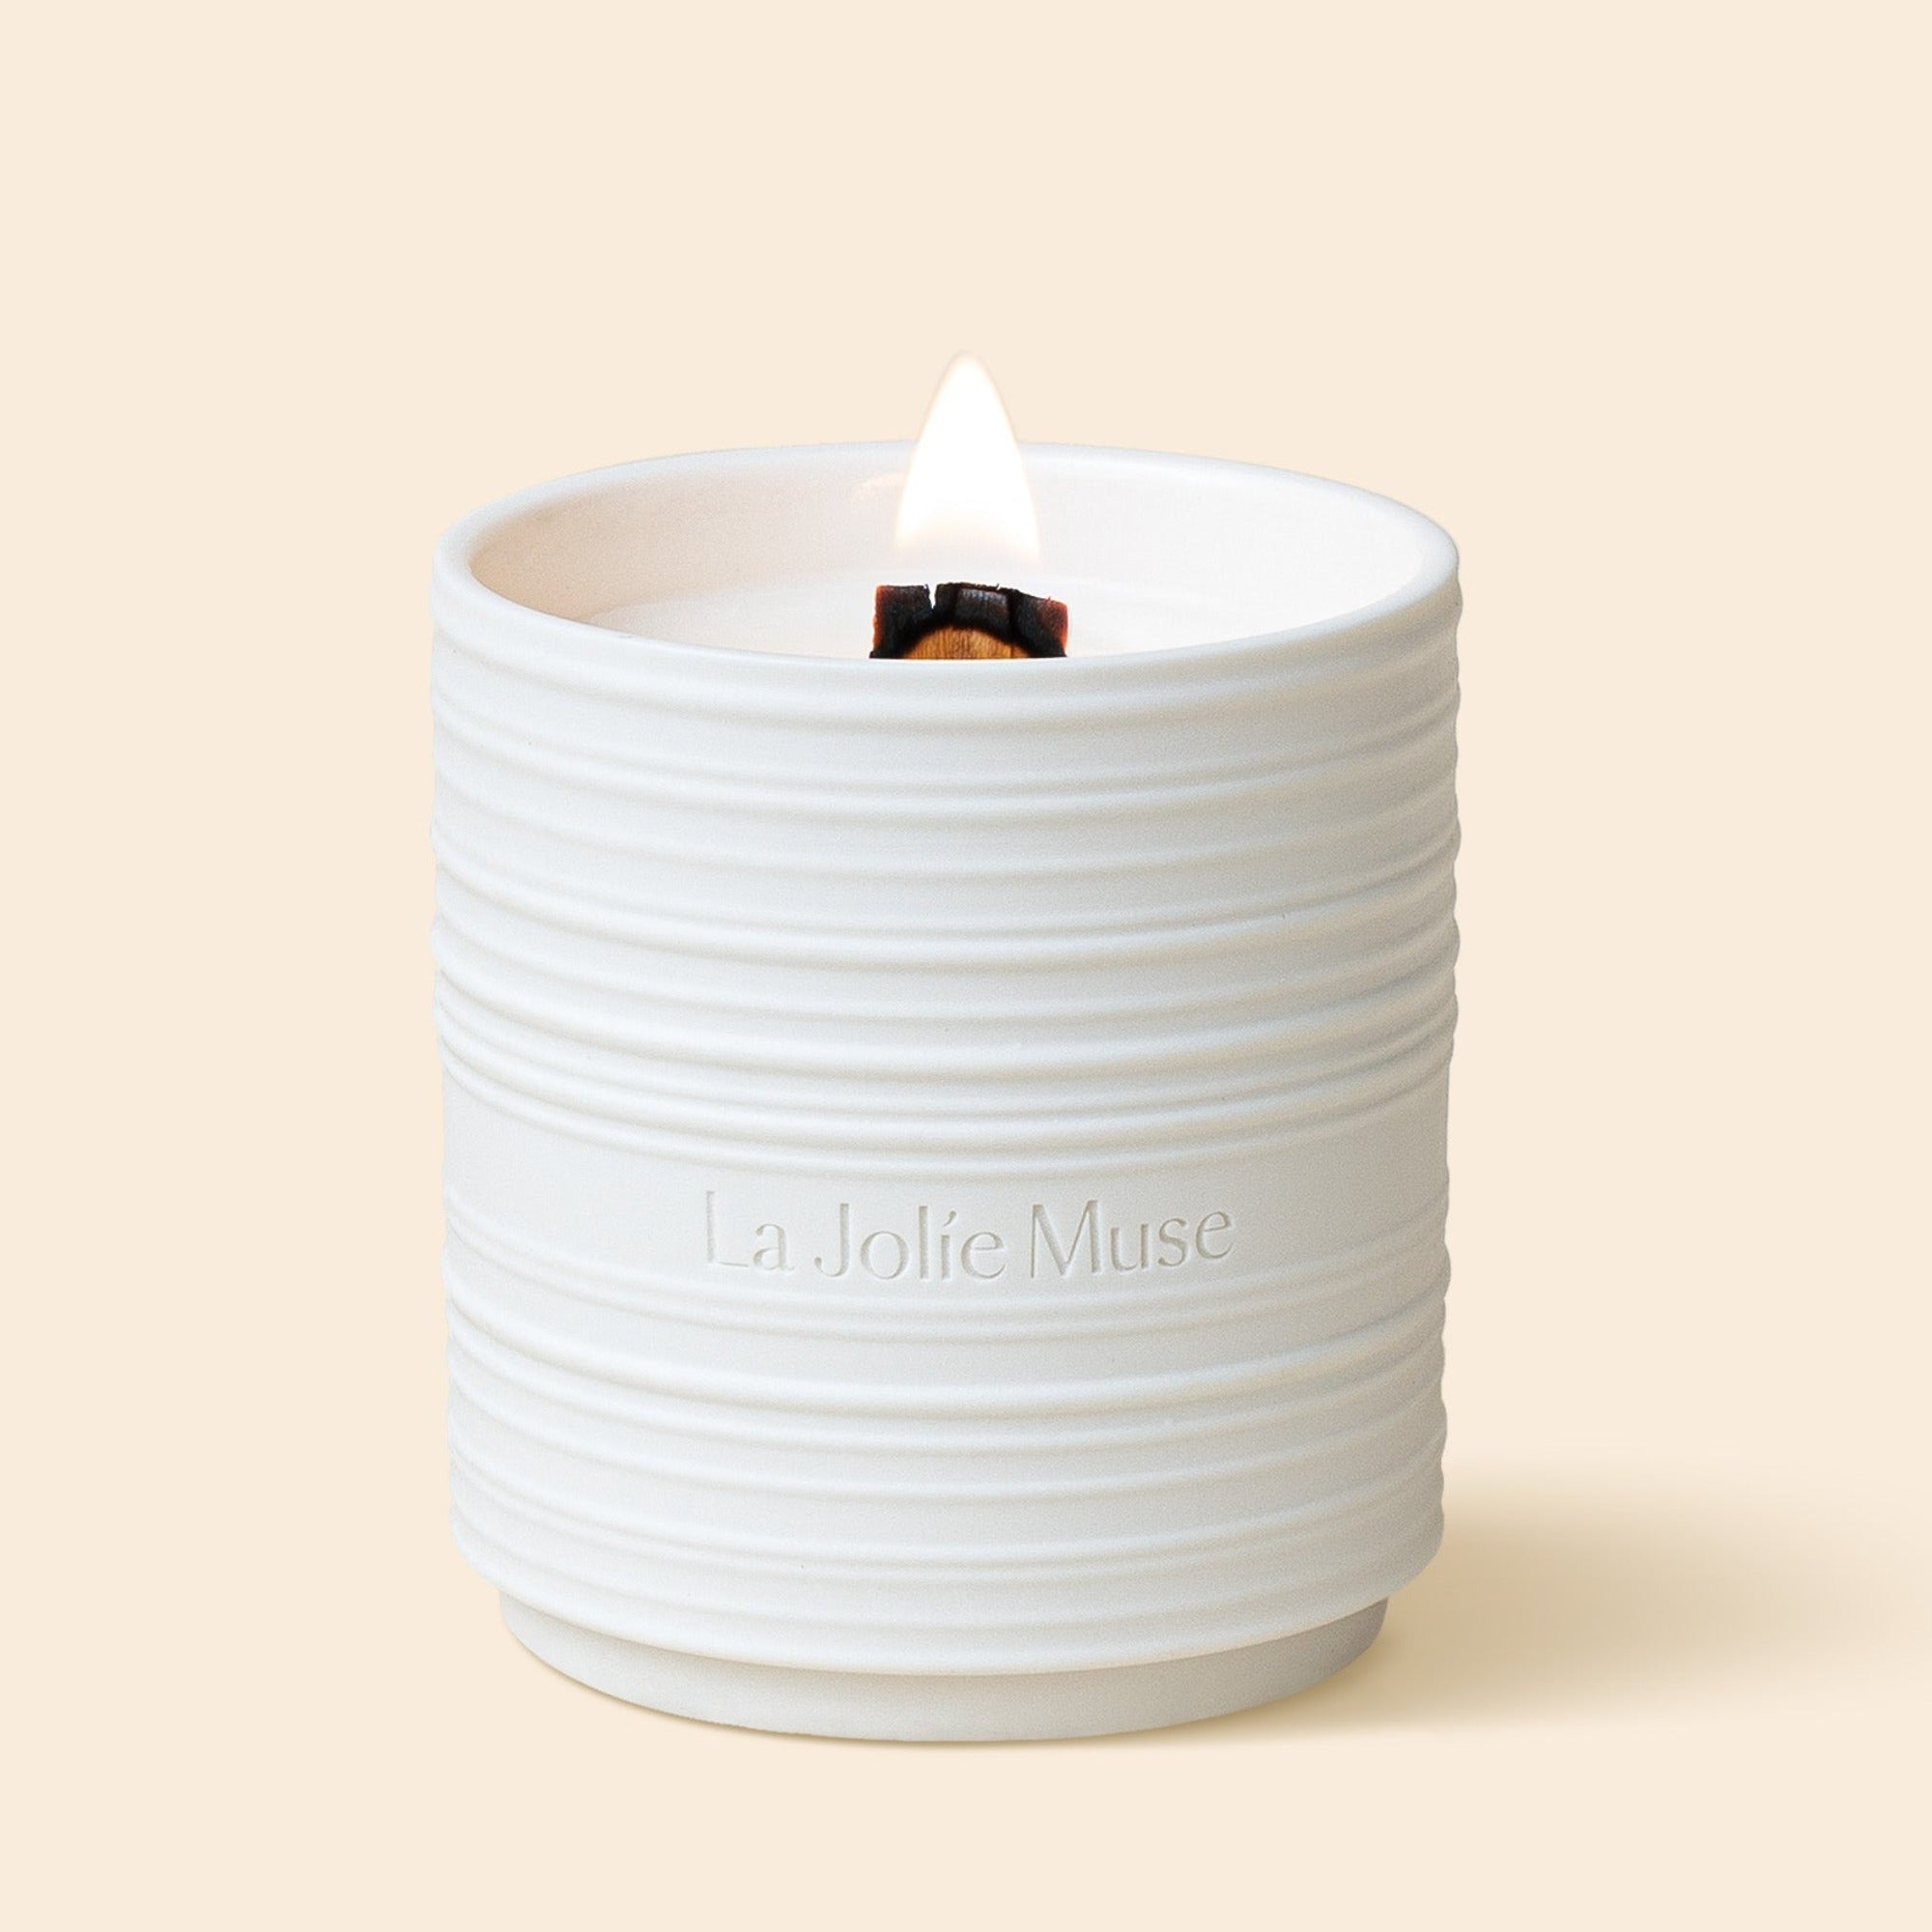 Product Shot of Lucienne - Yuzu & Neroli Blossom 15oz candle in the middle